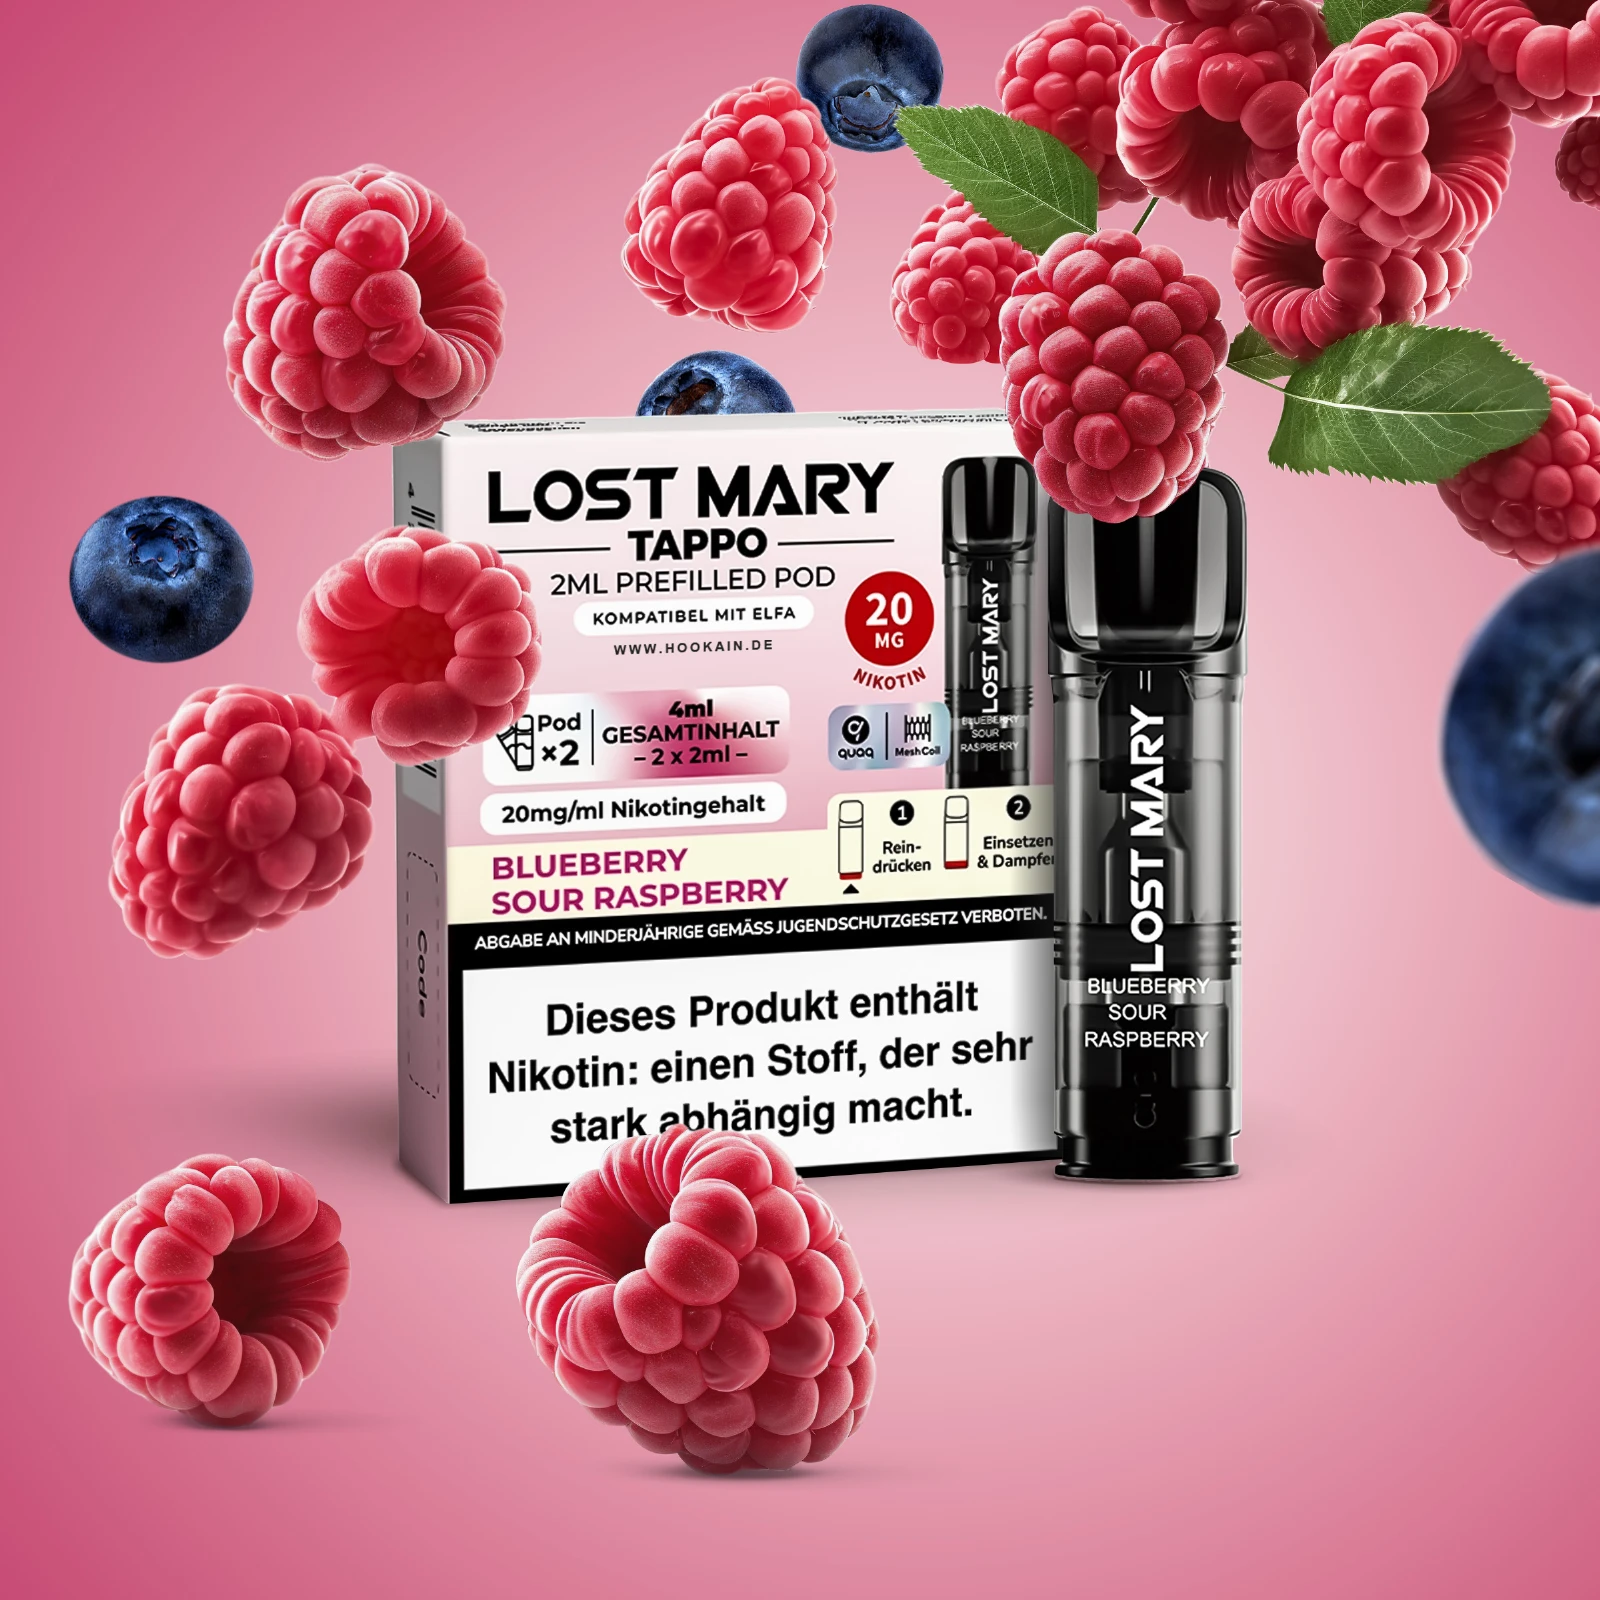 Lost Mary Tappo Blueberry Sour Raspberry : Umweltfreundliches Pod-System mit Prefilled Pods